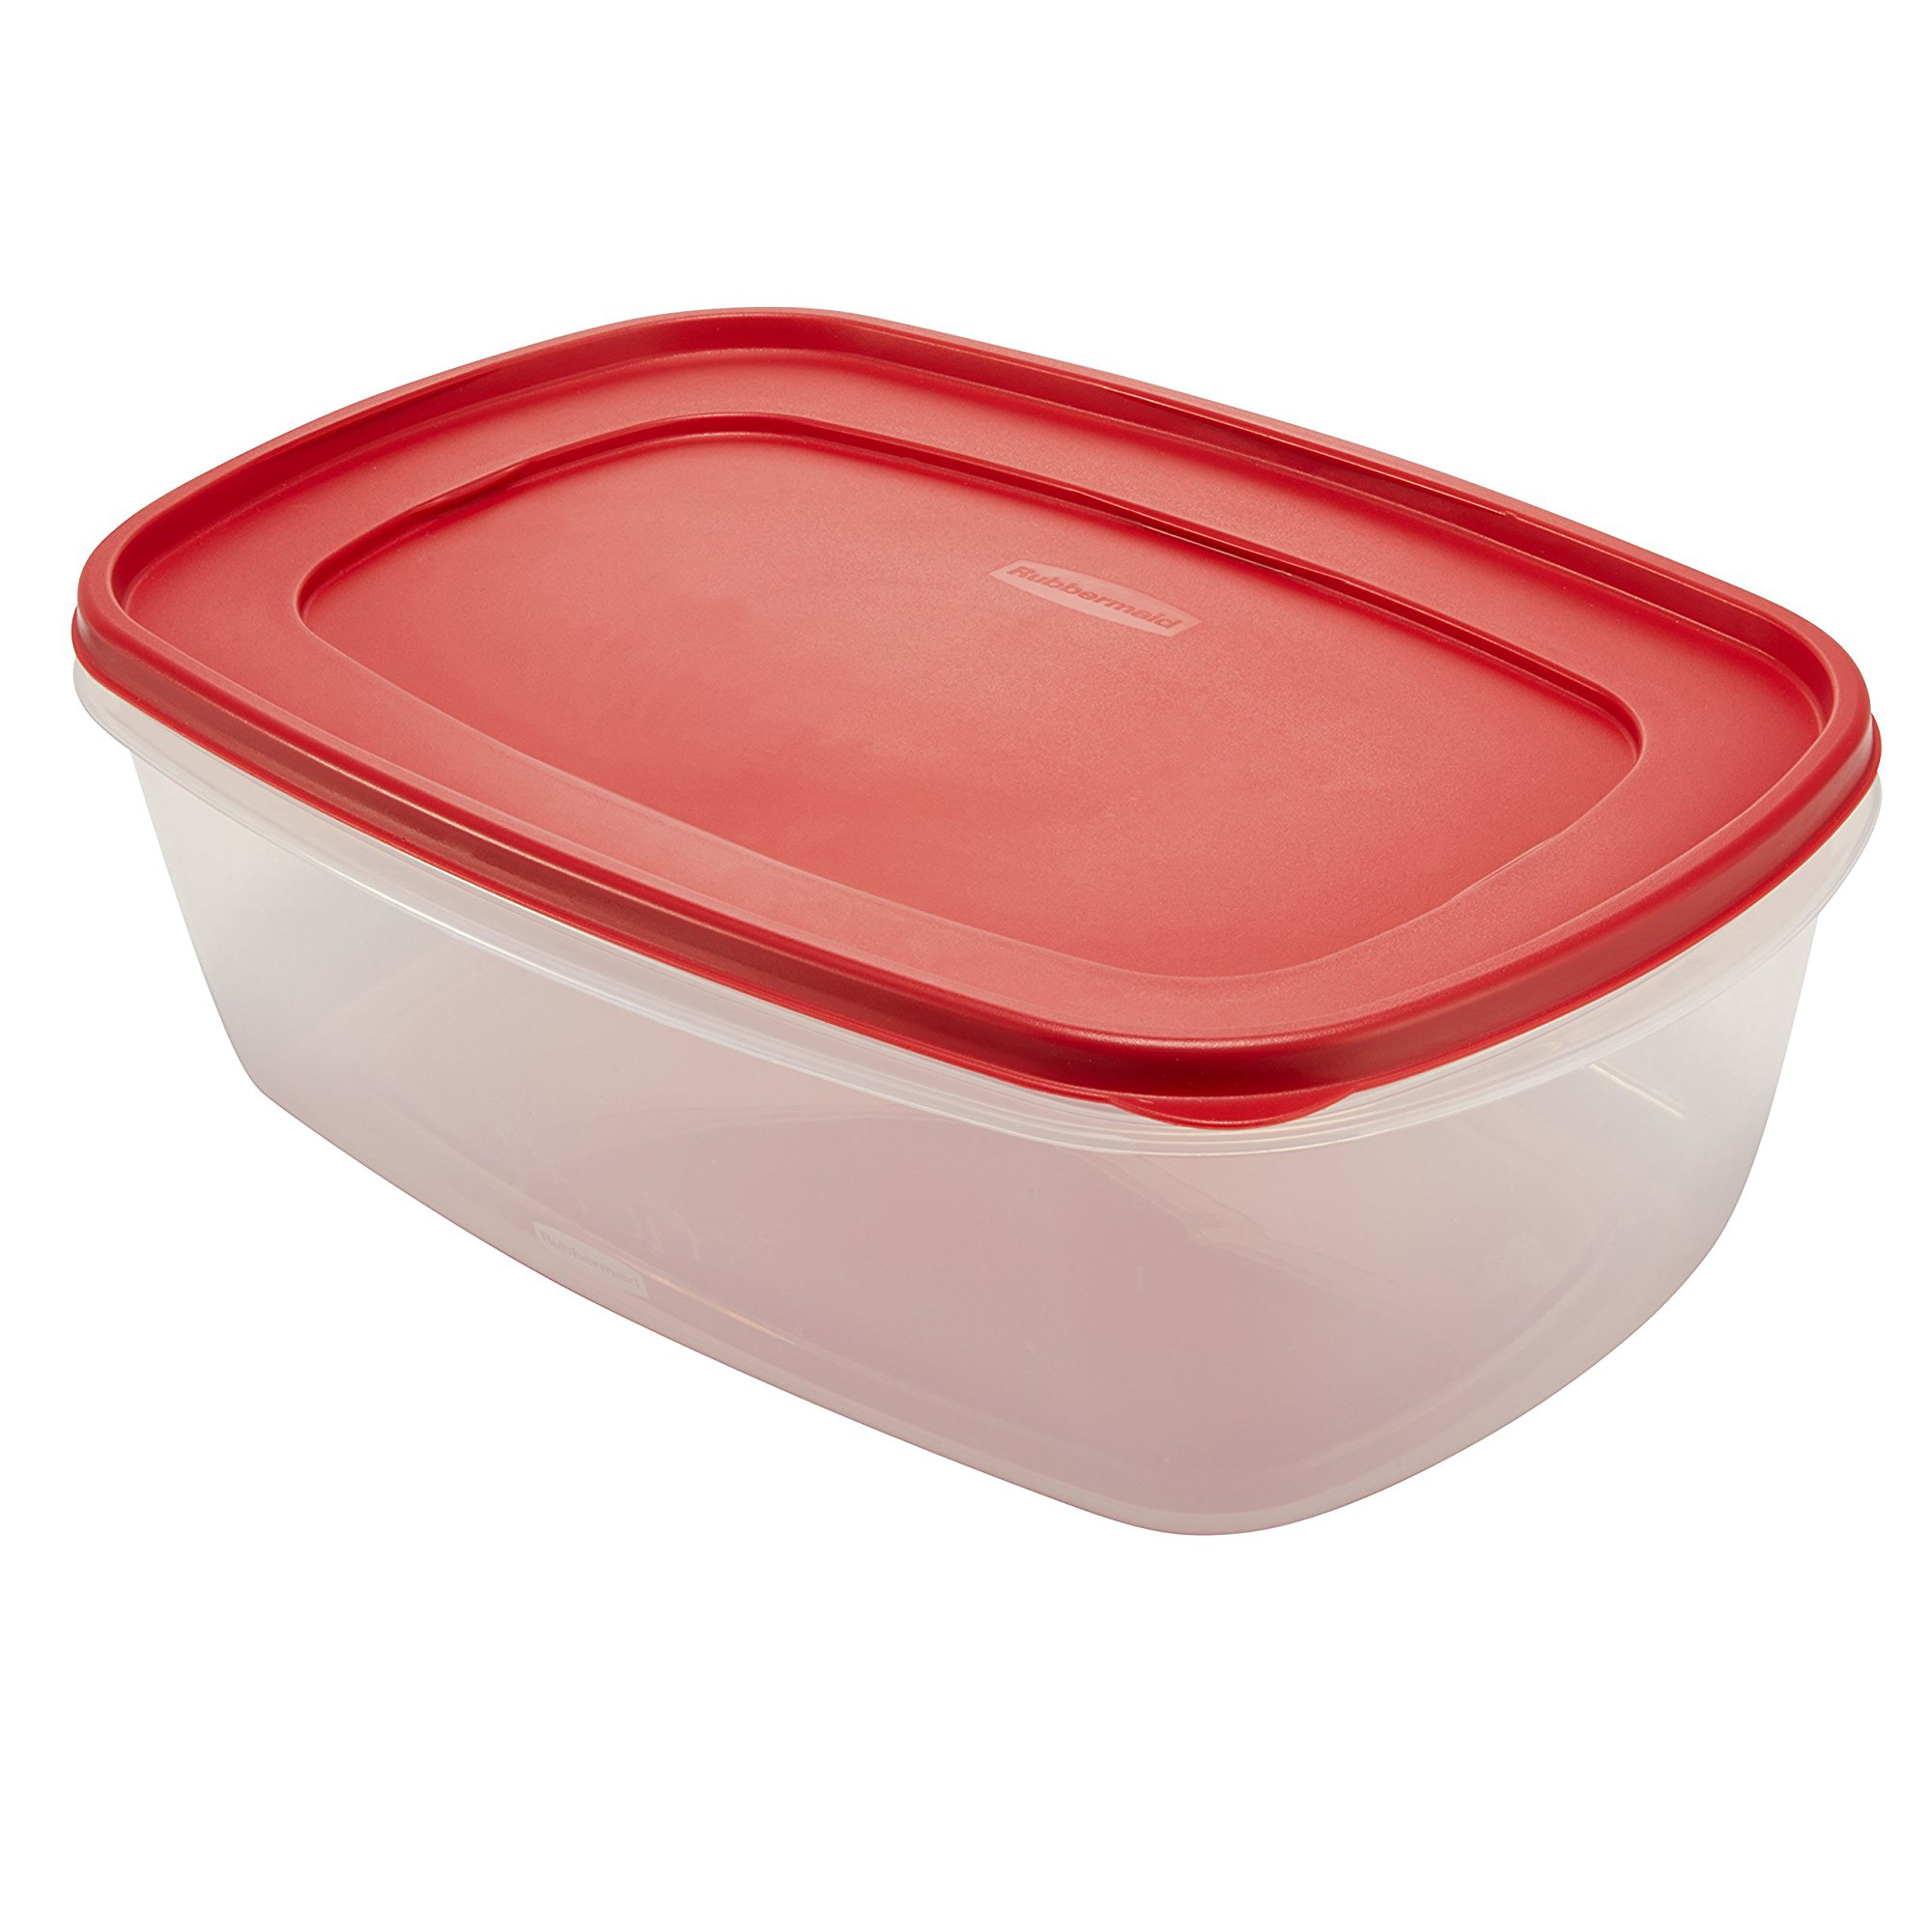 Rubbermaid Easy Find Lids Food Storage Container, Large with Red Lid, 2.5 Gallon - image 4 of 8